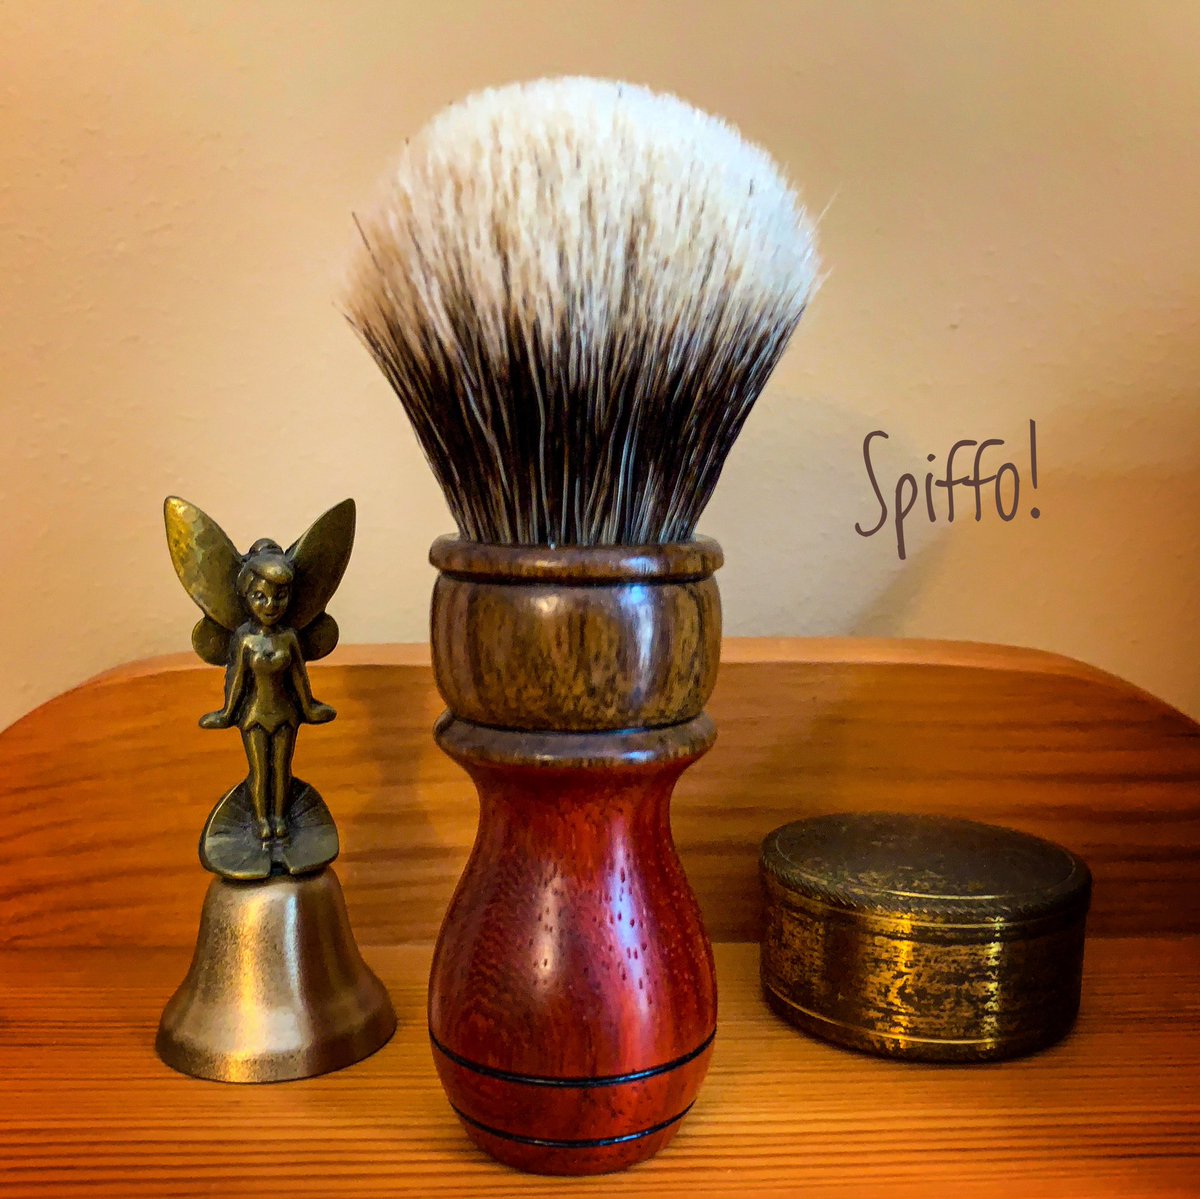 Colbred, with its Padauk and Shedua wooden handle and Manchurian Two Band knot, is a real stunner! #shavingbrush #shavebrush #spiffo #spiffoman #shaveoftheday #shaving #shavingbrushes #shavingproducts #wetshaving #madeinhalifax #halifax #halifaxns #novascotia